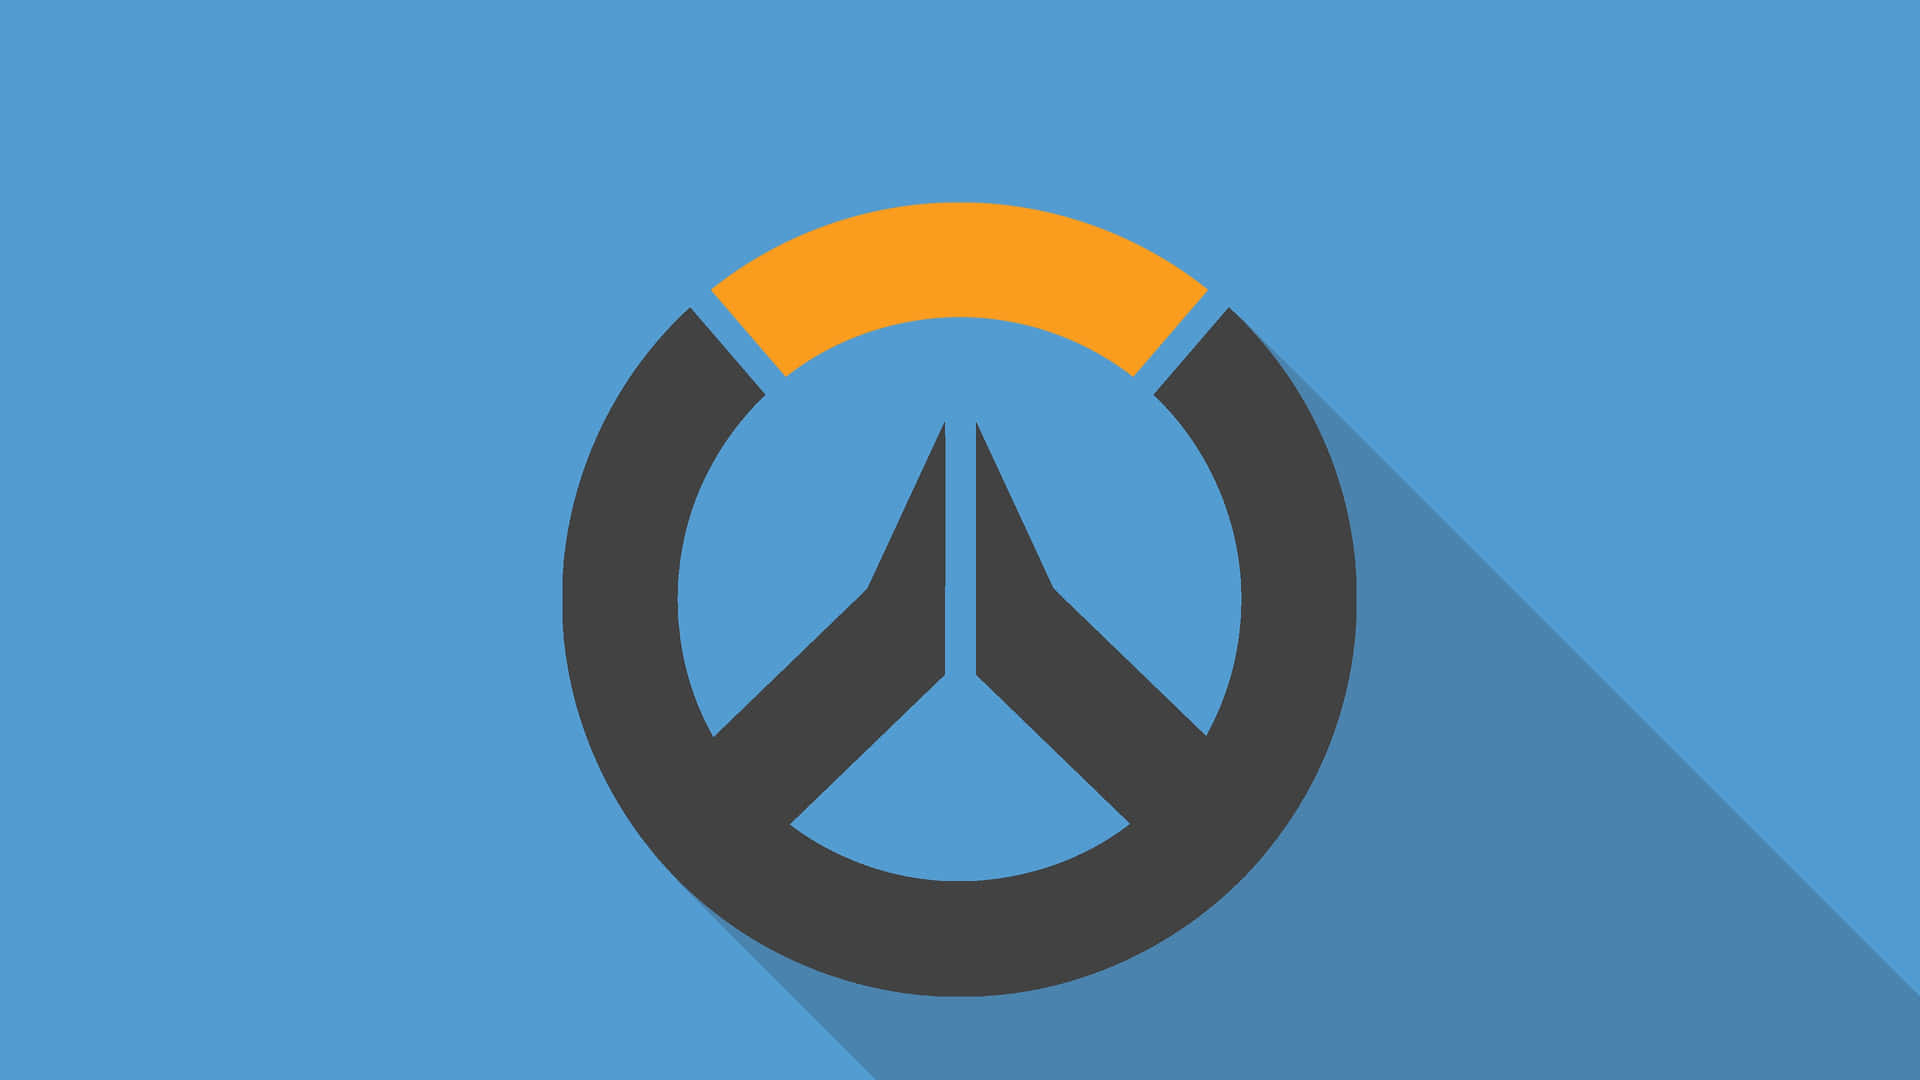 Covering the Wall with Overwatch Minimalist Graffiti Wallpaper